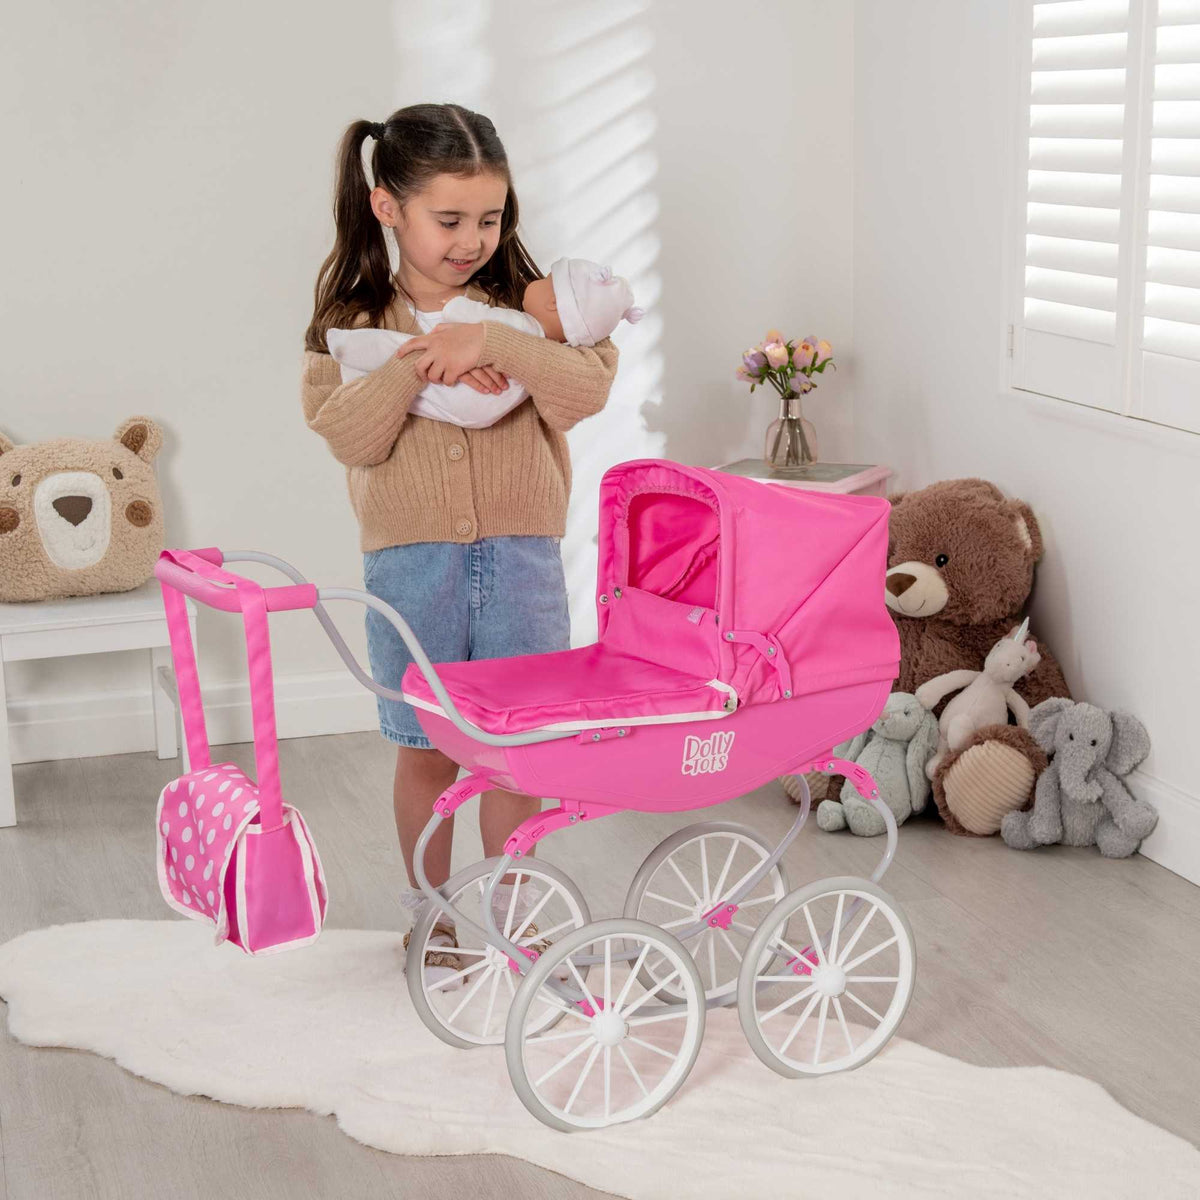 Dolly Tots Traditional Carriage Dolls Pram